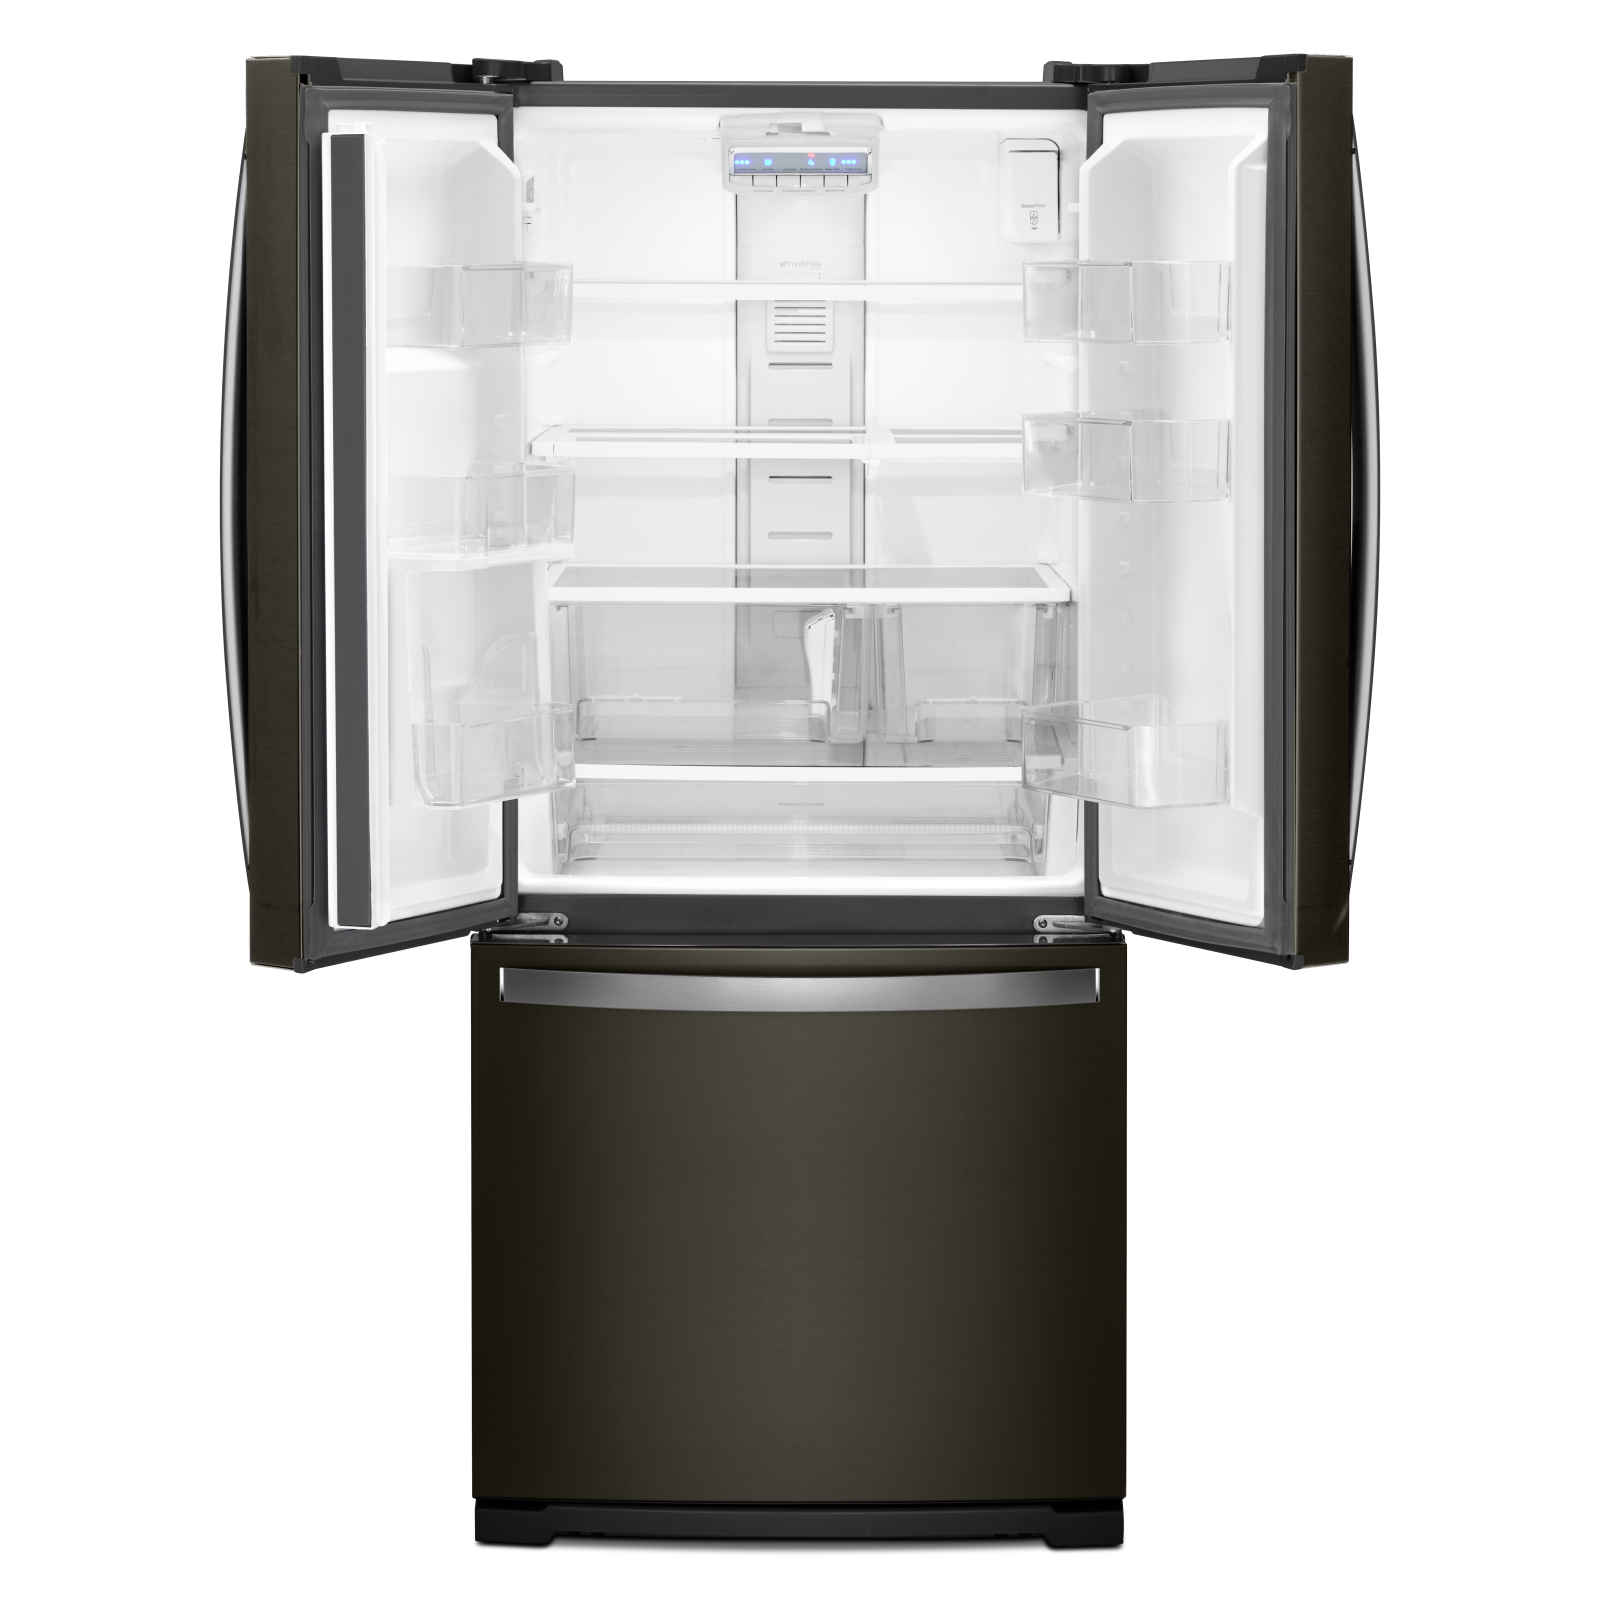 Whirlpool - 29.5 Inch 20 cu. ft French Door Refrigerator in Black Stainless - WRF560SMHV